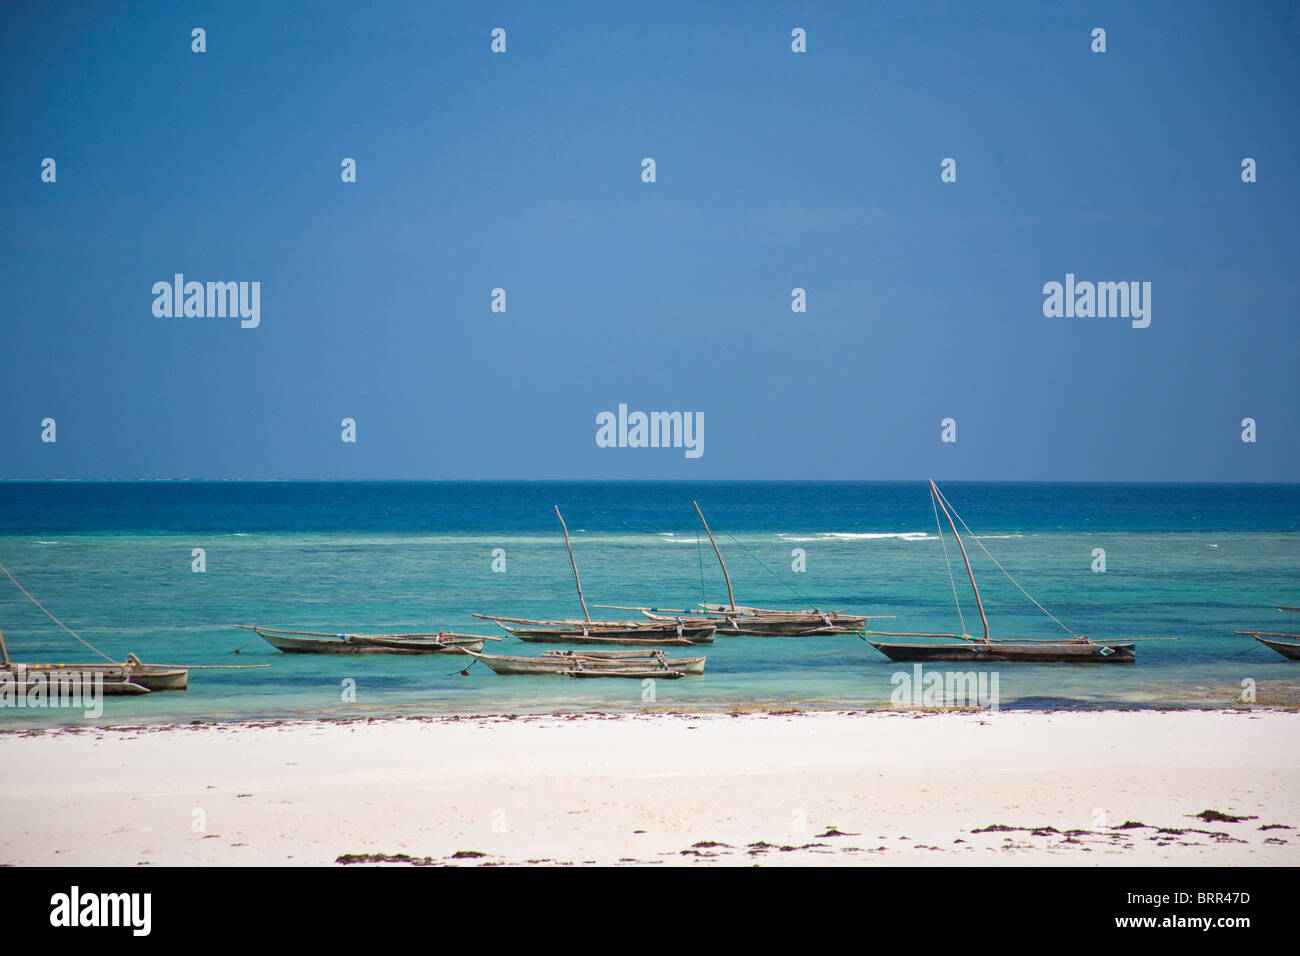 Beach scene with outrigger fishing boats moored in shallow water off Mnemba Island Stock Photo